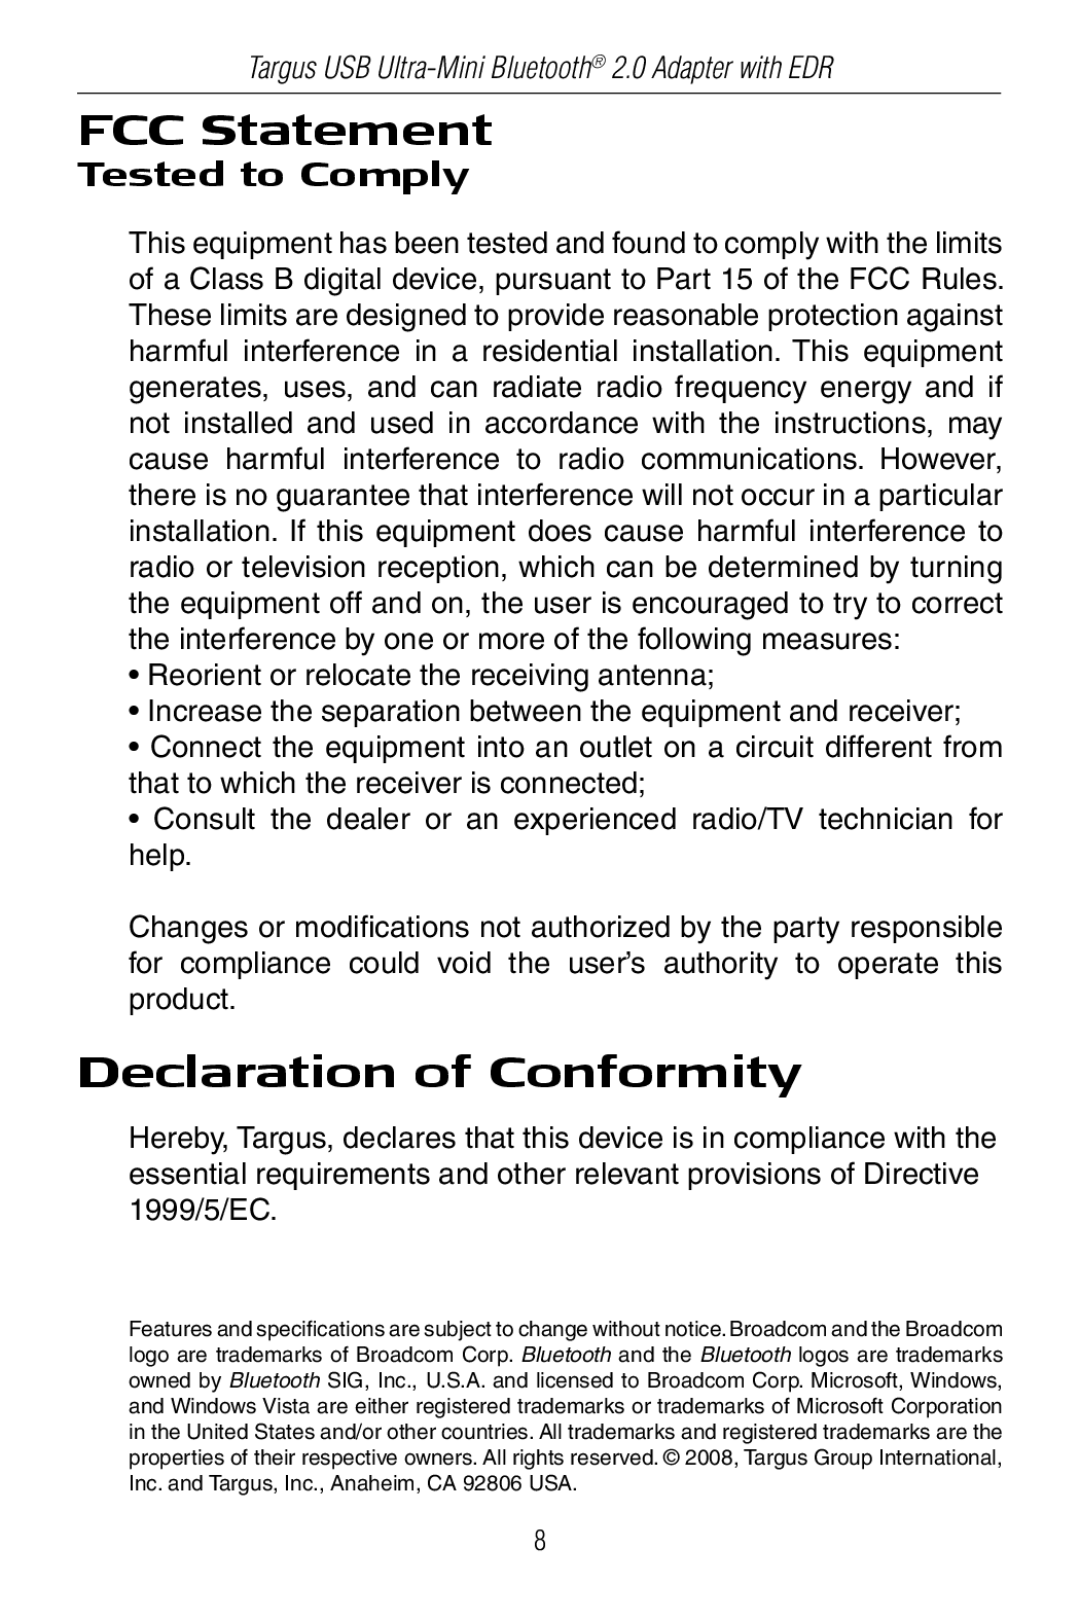 Targus Mini Bluetooth 2.0 Adapter with DER specifications FCC Statement, Declaration of Conformity, Tested to Comply 